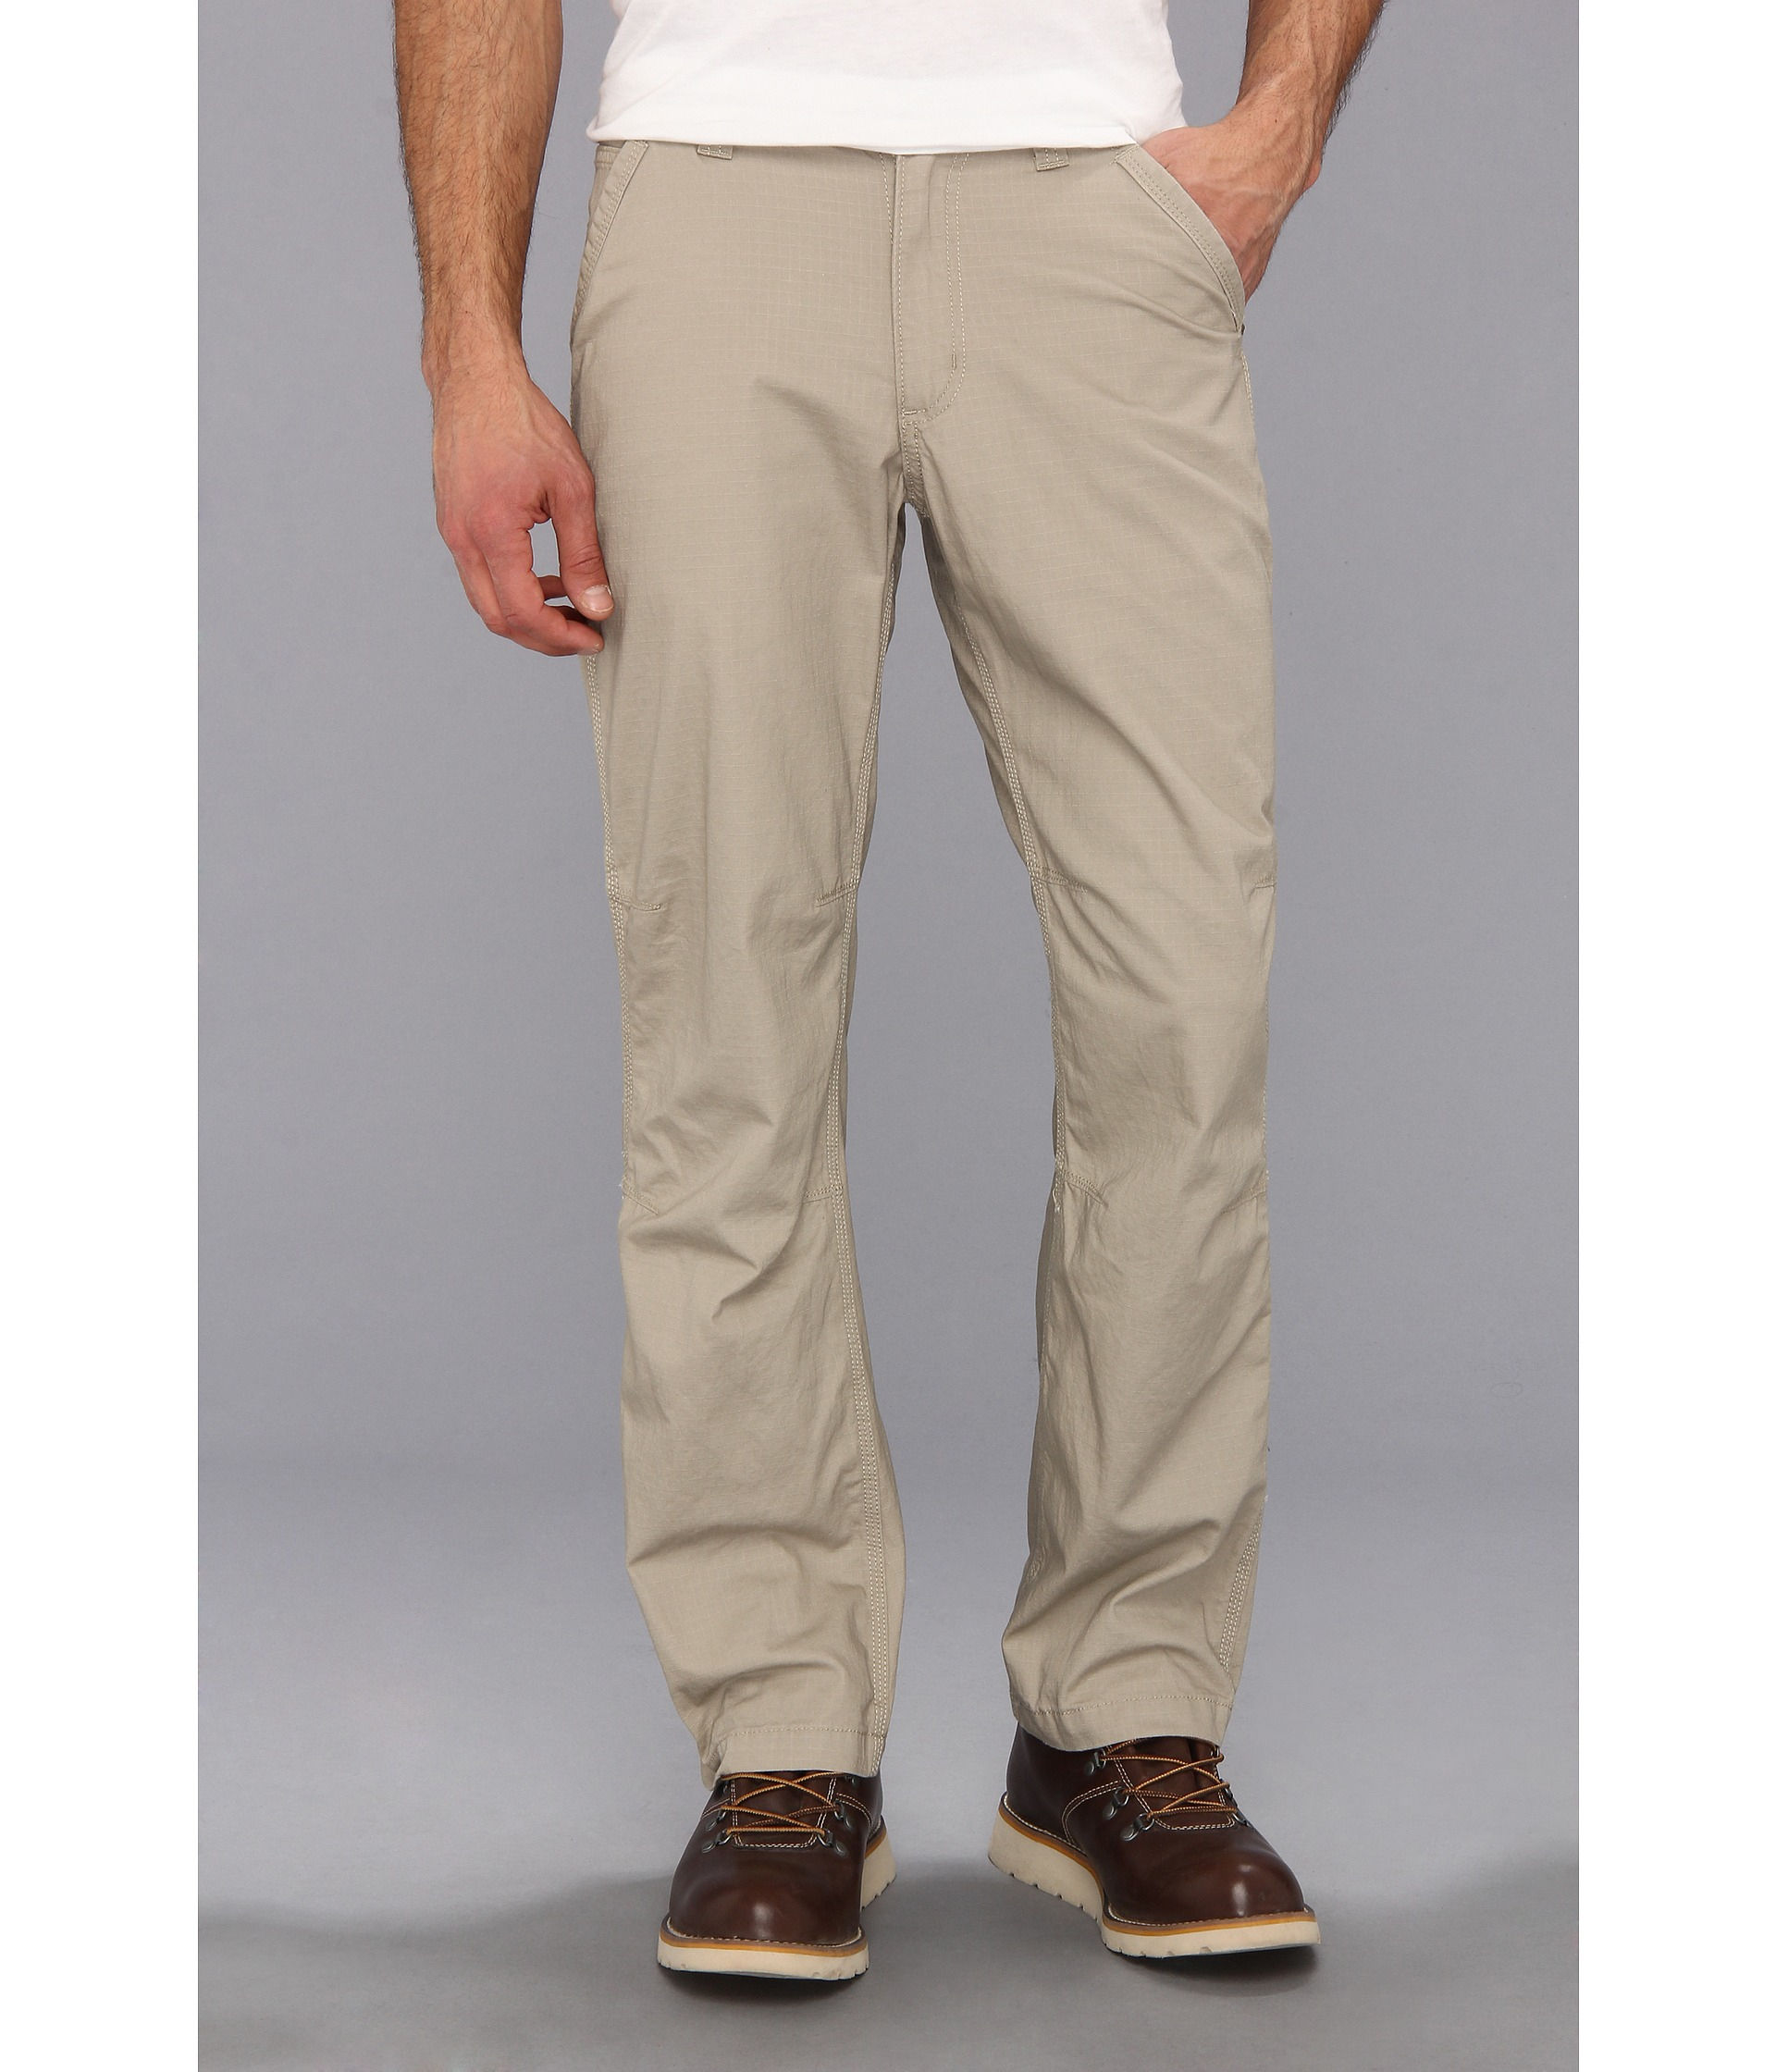 Carhartt Tacoma Ripstop Pants Netherlands, SAVE 51% - aveclumiere.com